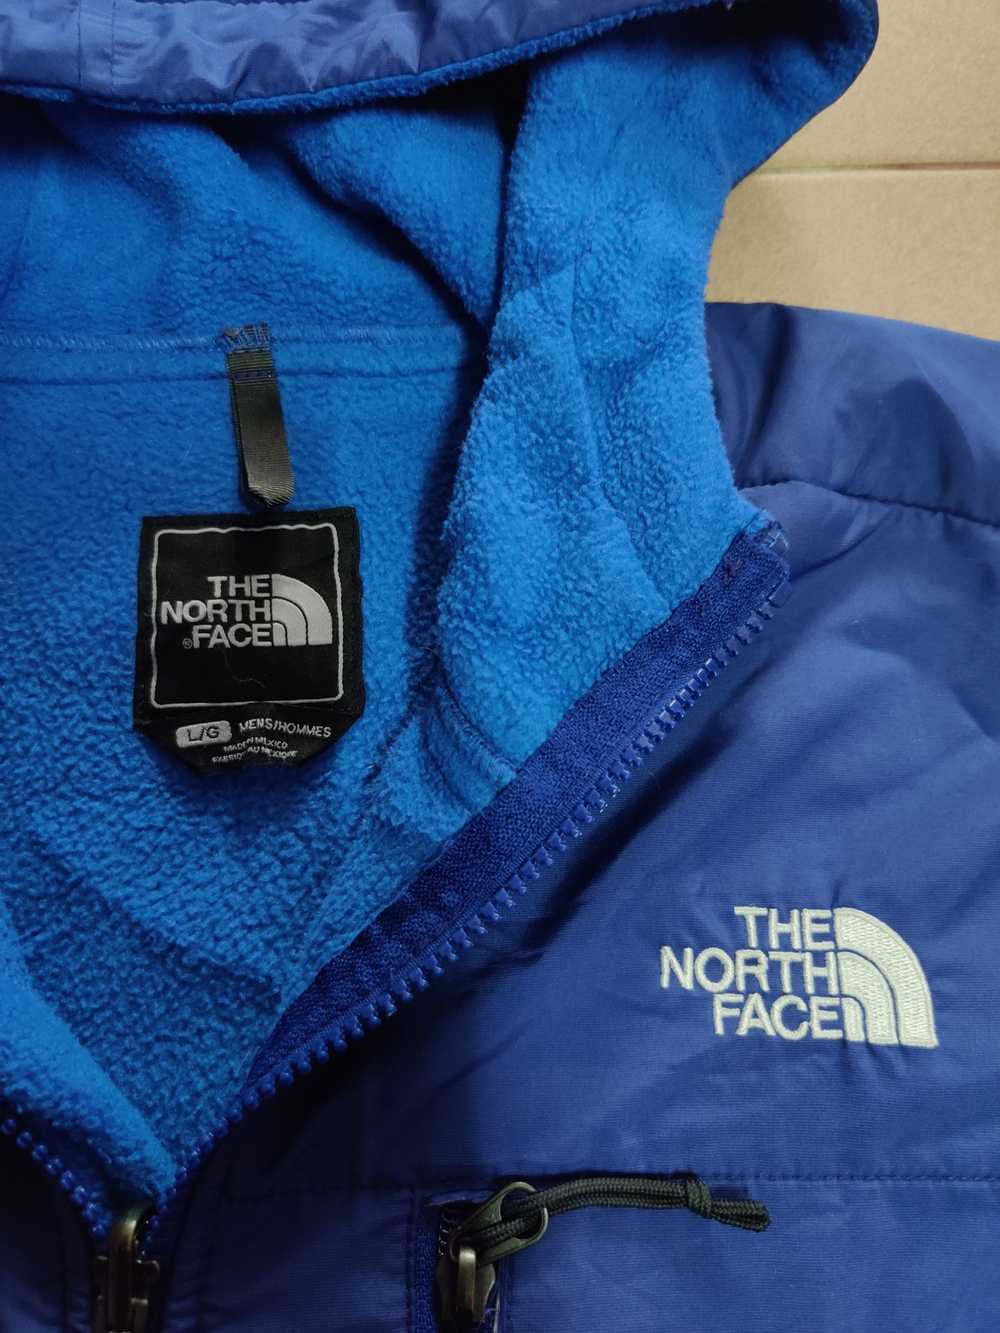 The North Face The north face denali fleece jacket - image 7